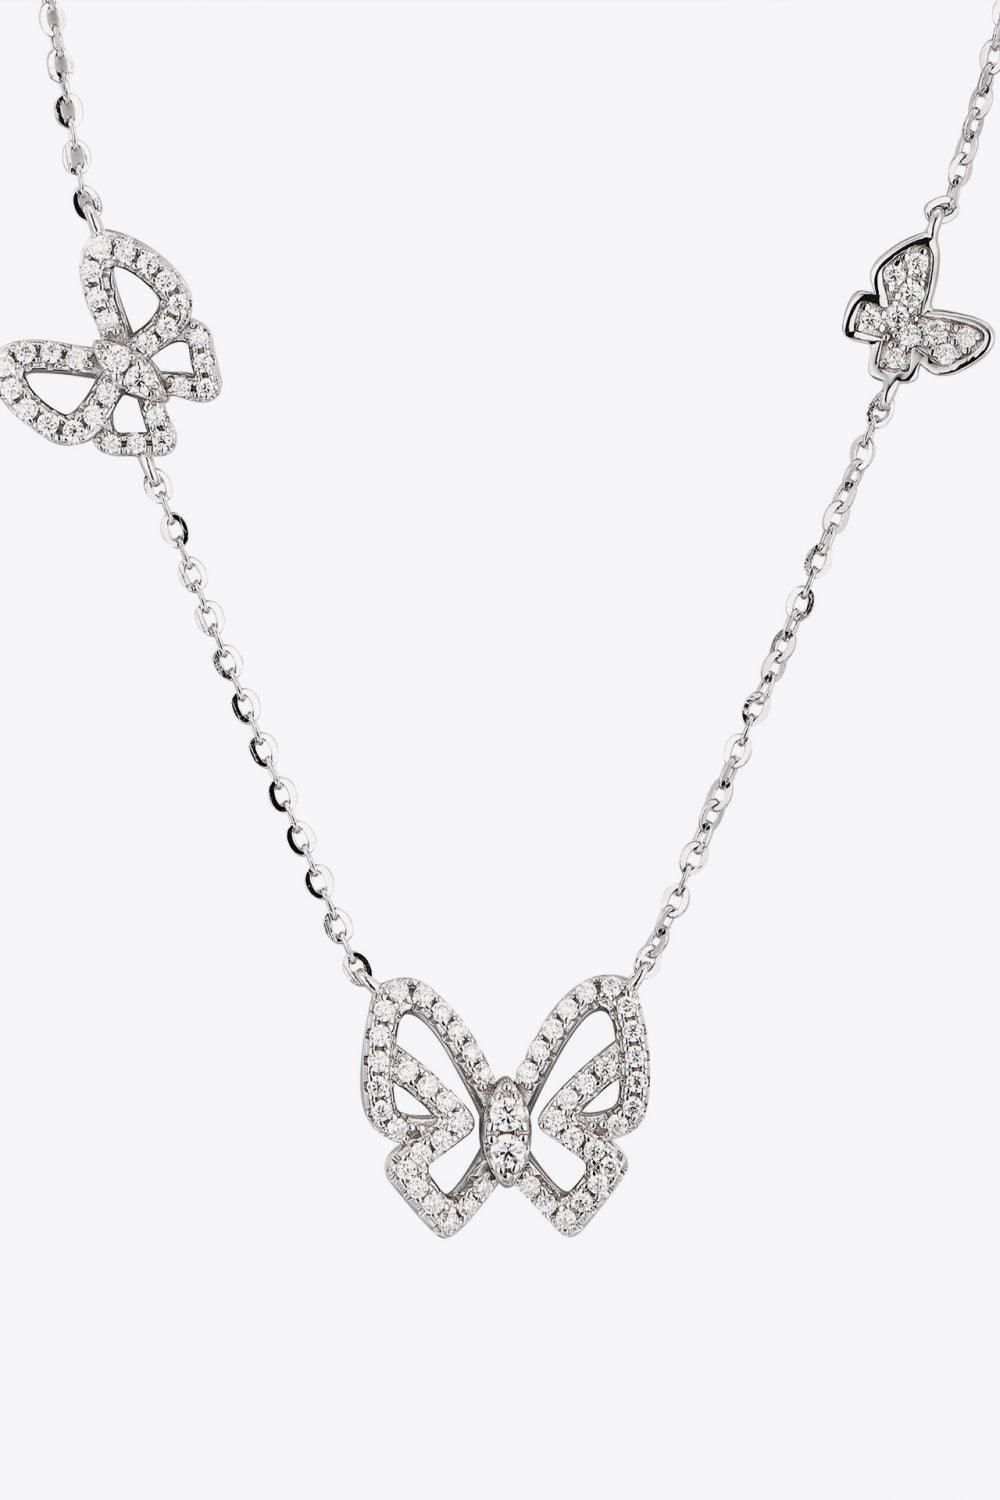 Moissanite Butterfly Shape Necklace - God's Girl Gifts And Apparel